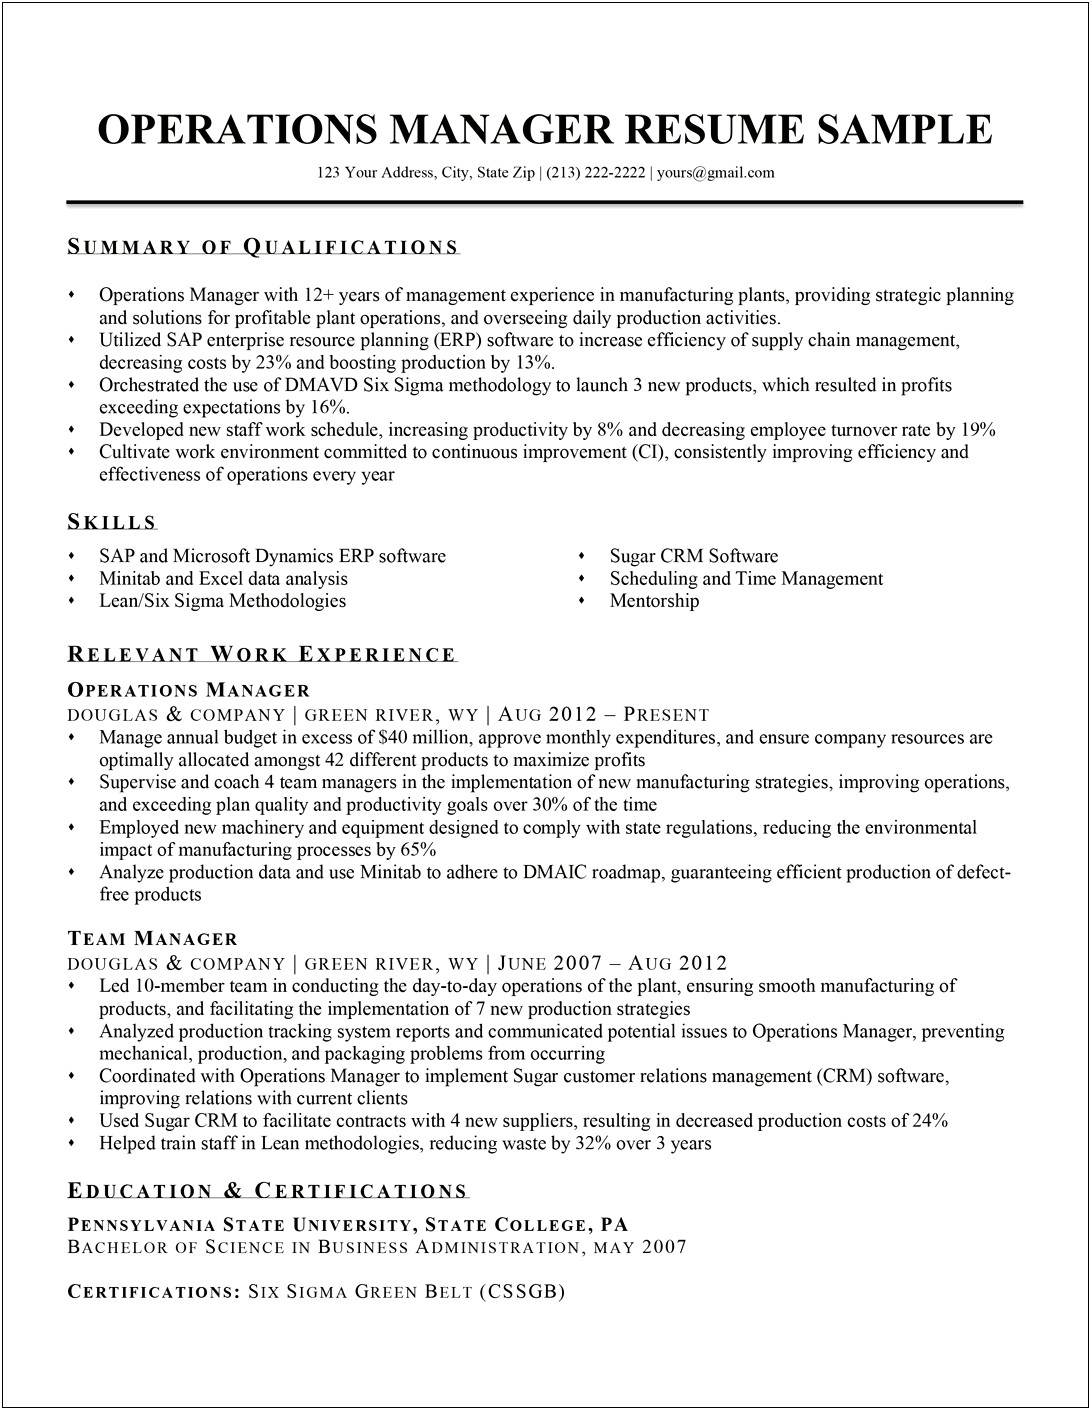 Brief Summary For Resume Samples